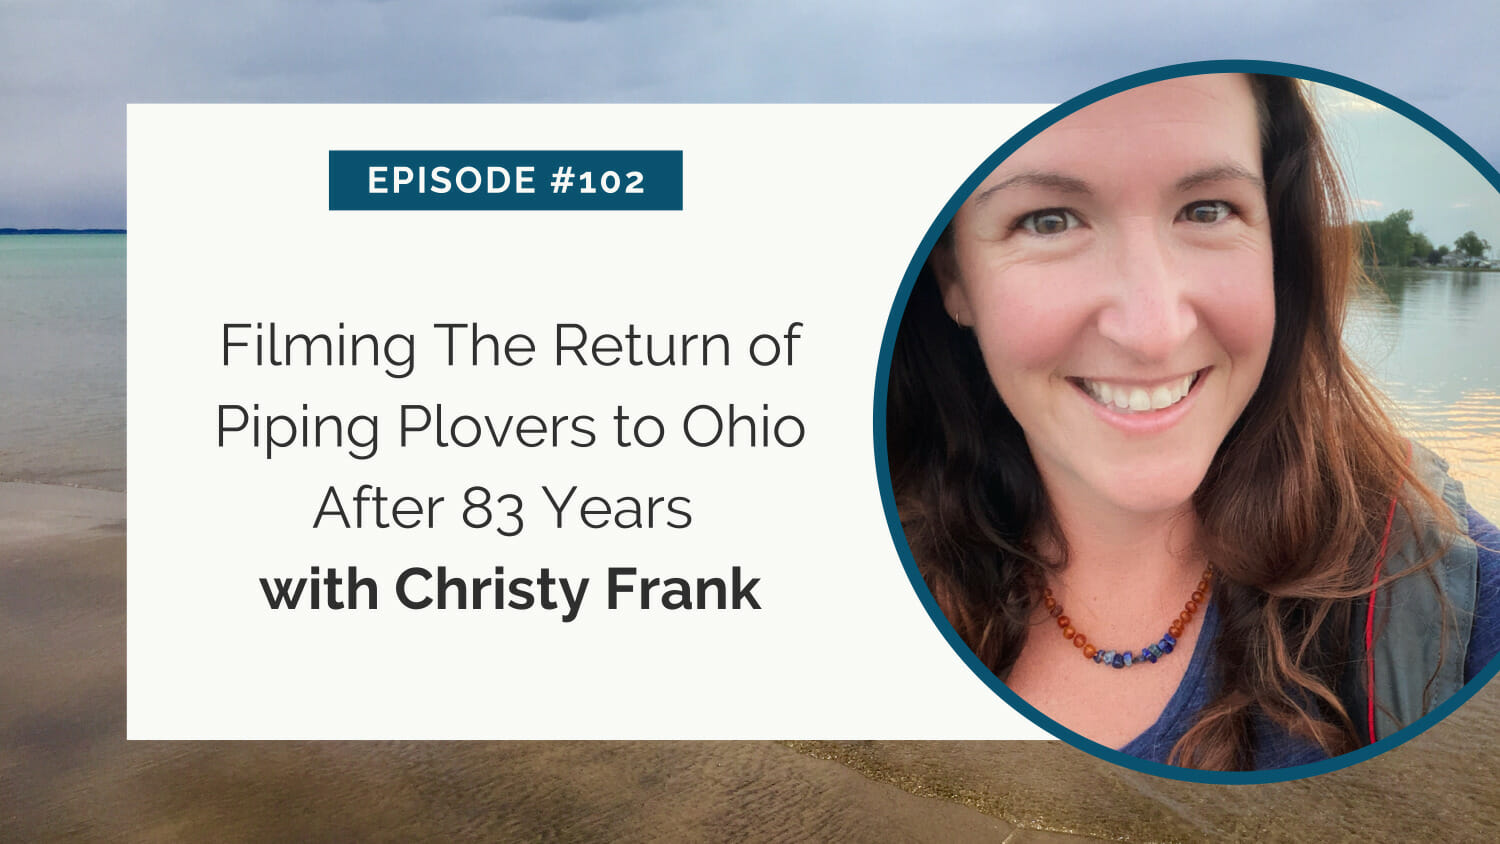 A woman smiling at the camera with text overlay about filming an episode on piping plovers' return to ohio featuring christy frank.